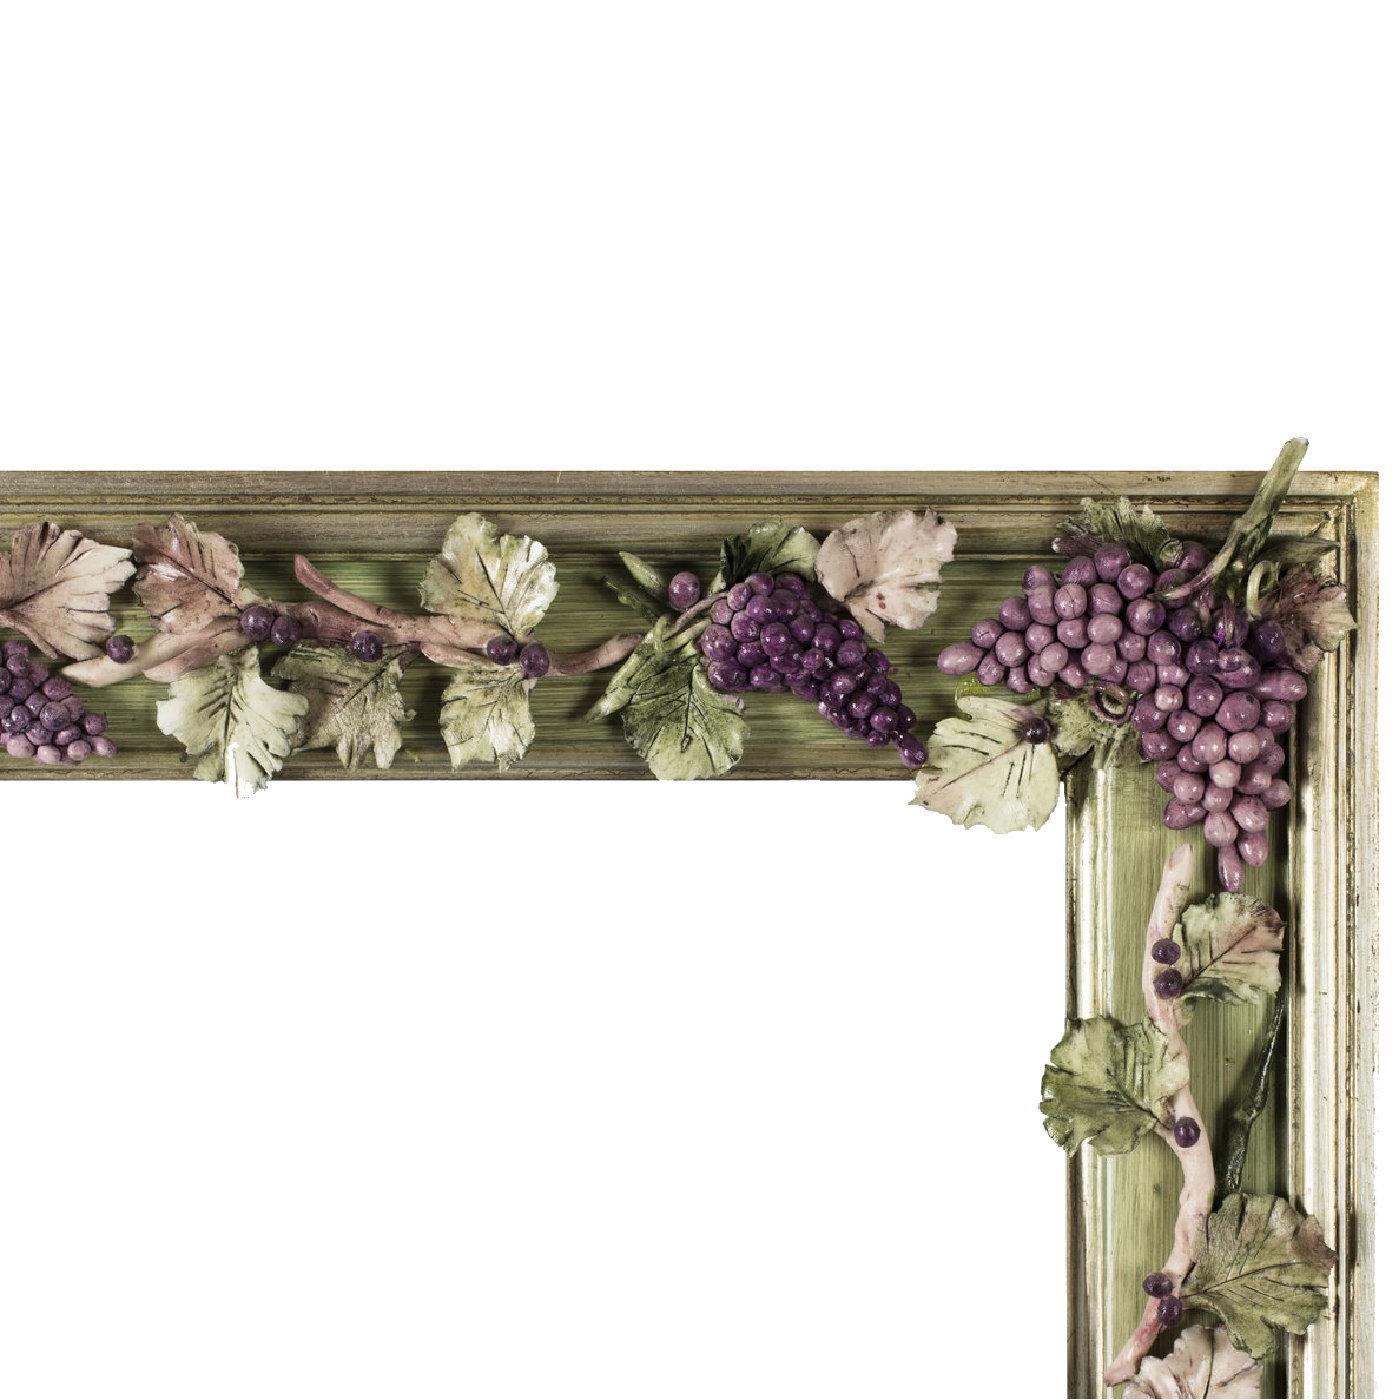 A veritable work of art by master carvers, framers, and ceramists, this charming frame boasts a singular character defined by a realistic grape detail around the frame. Best suited to a rustic-chic or modern interior, it is handcrafted of wood